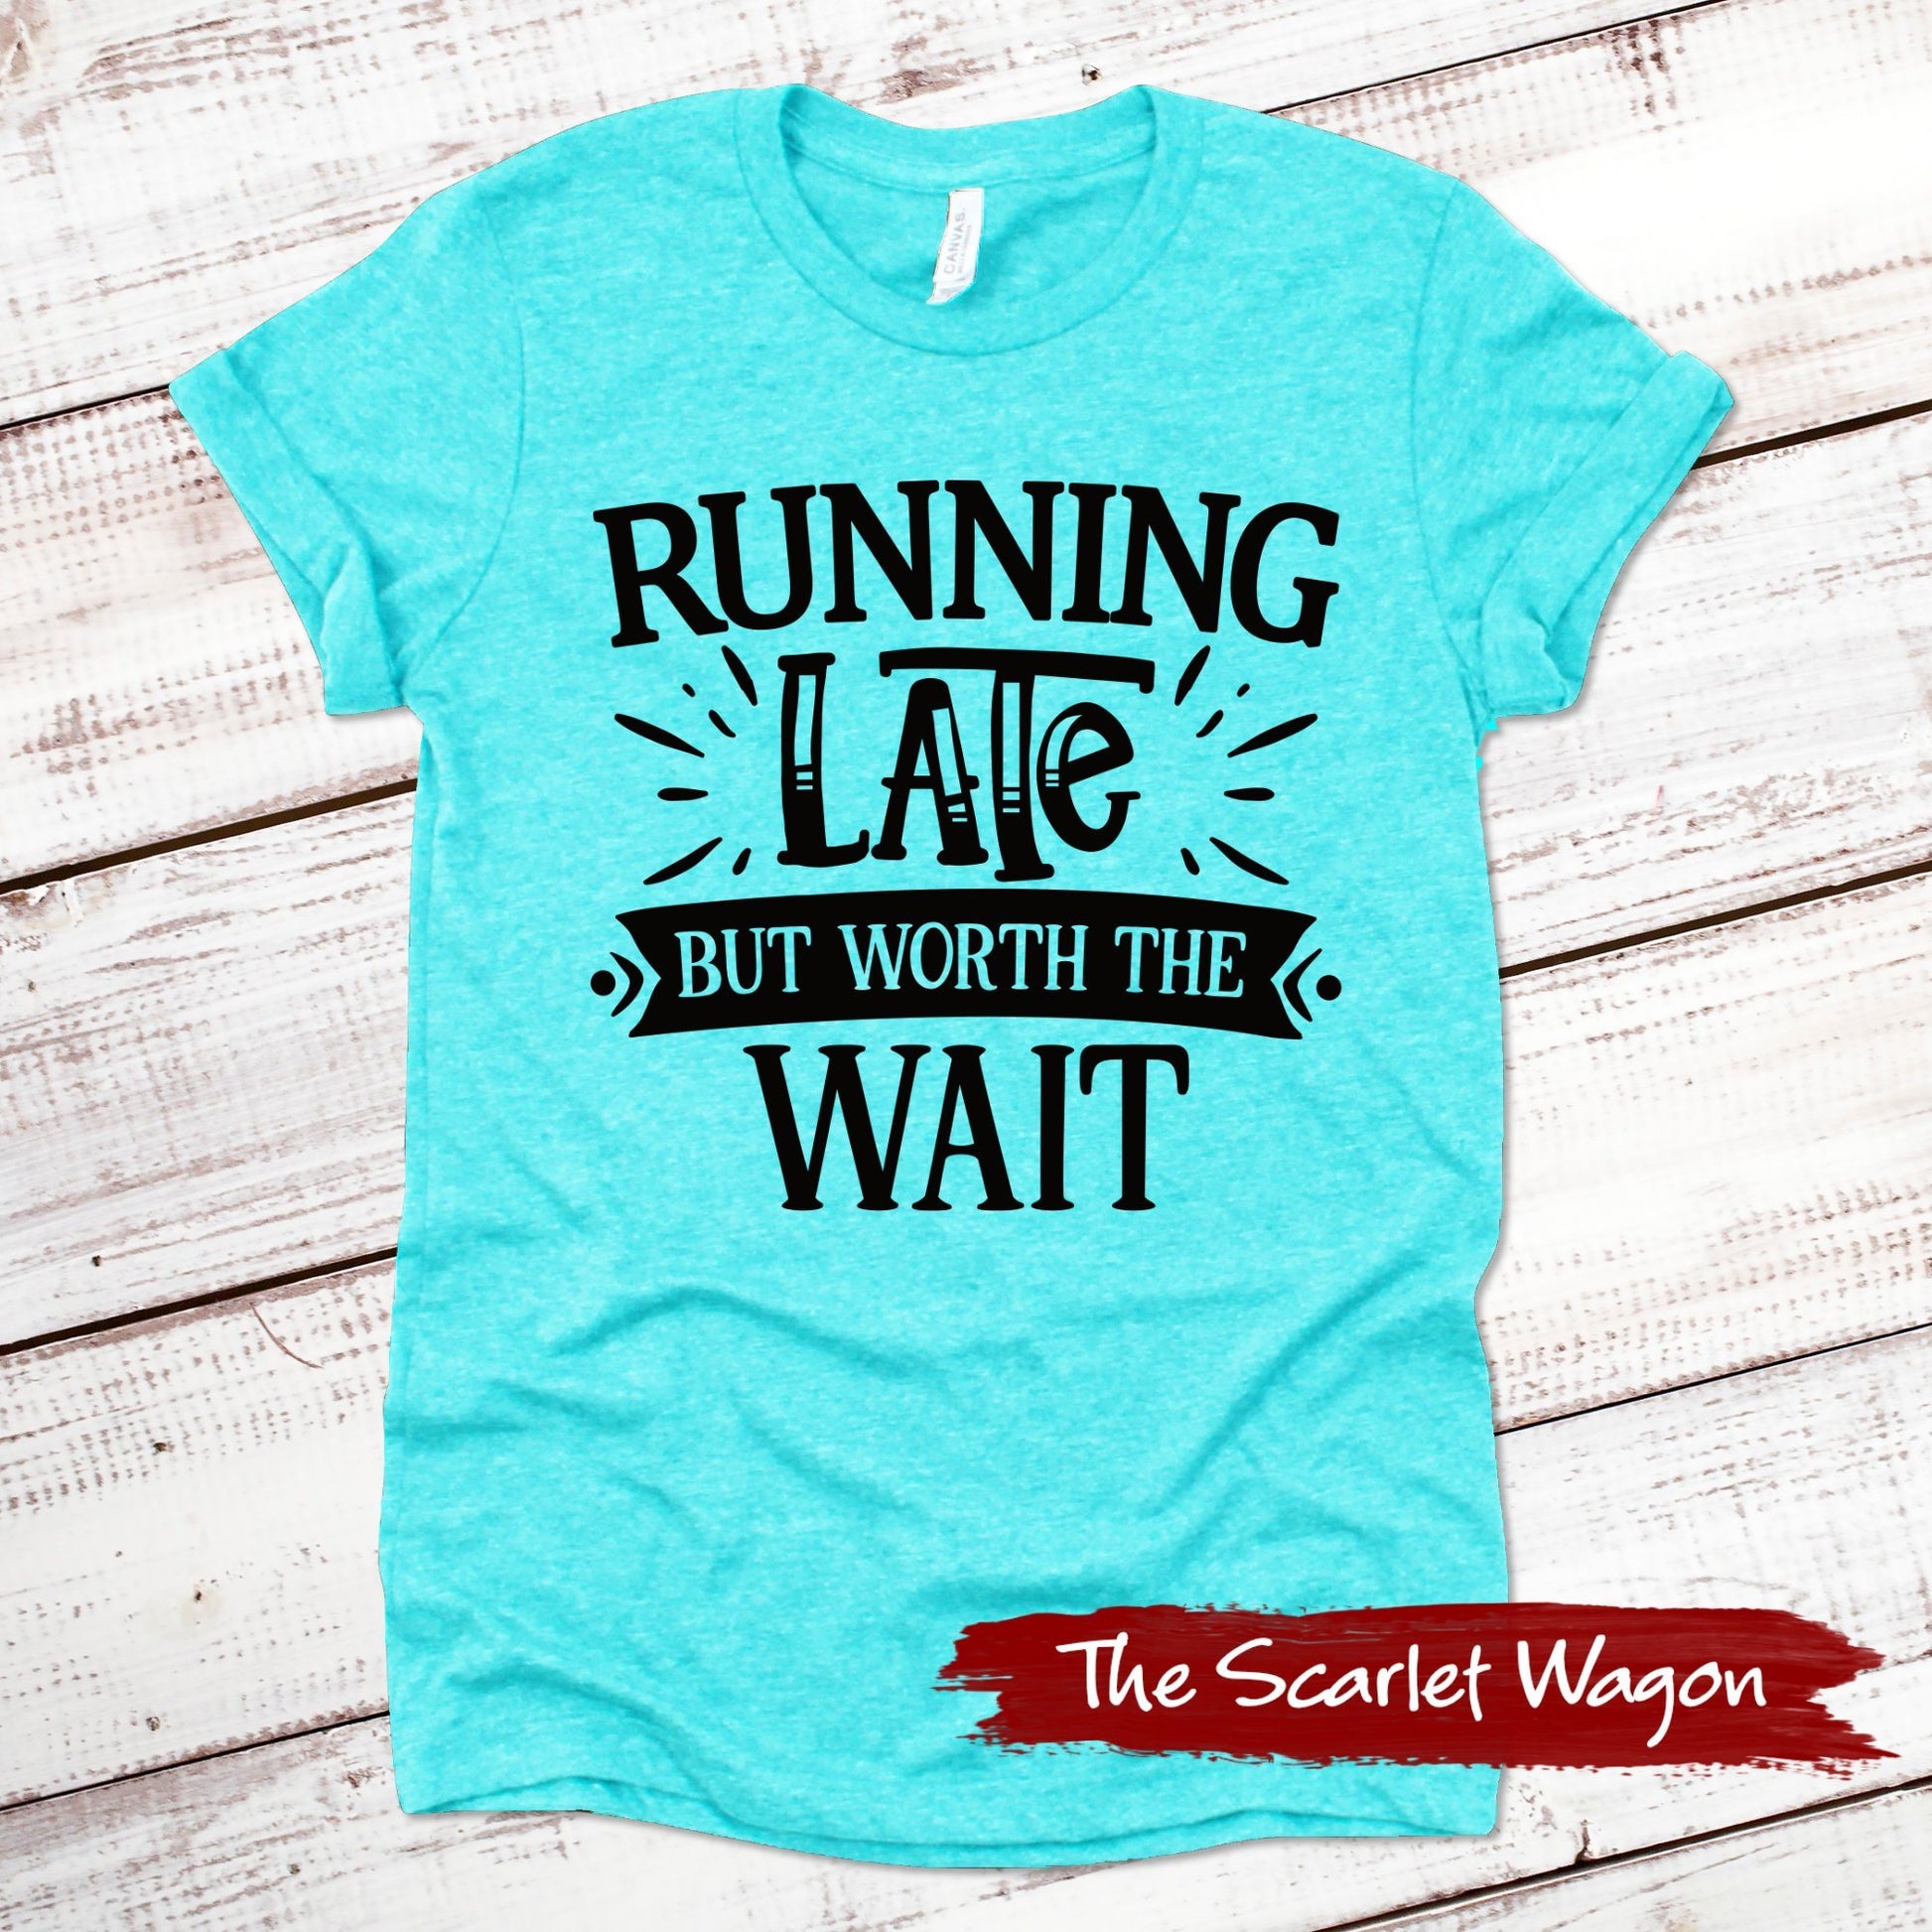 Running Late But Worth the Wait Funny Shirt Scarlet Wagon Heather Teal XS 